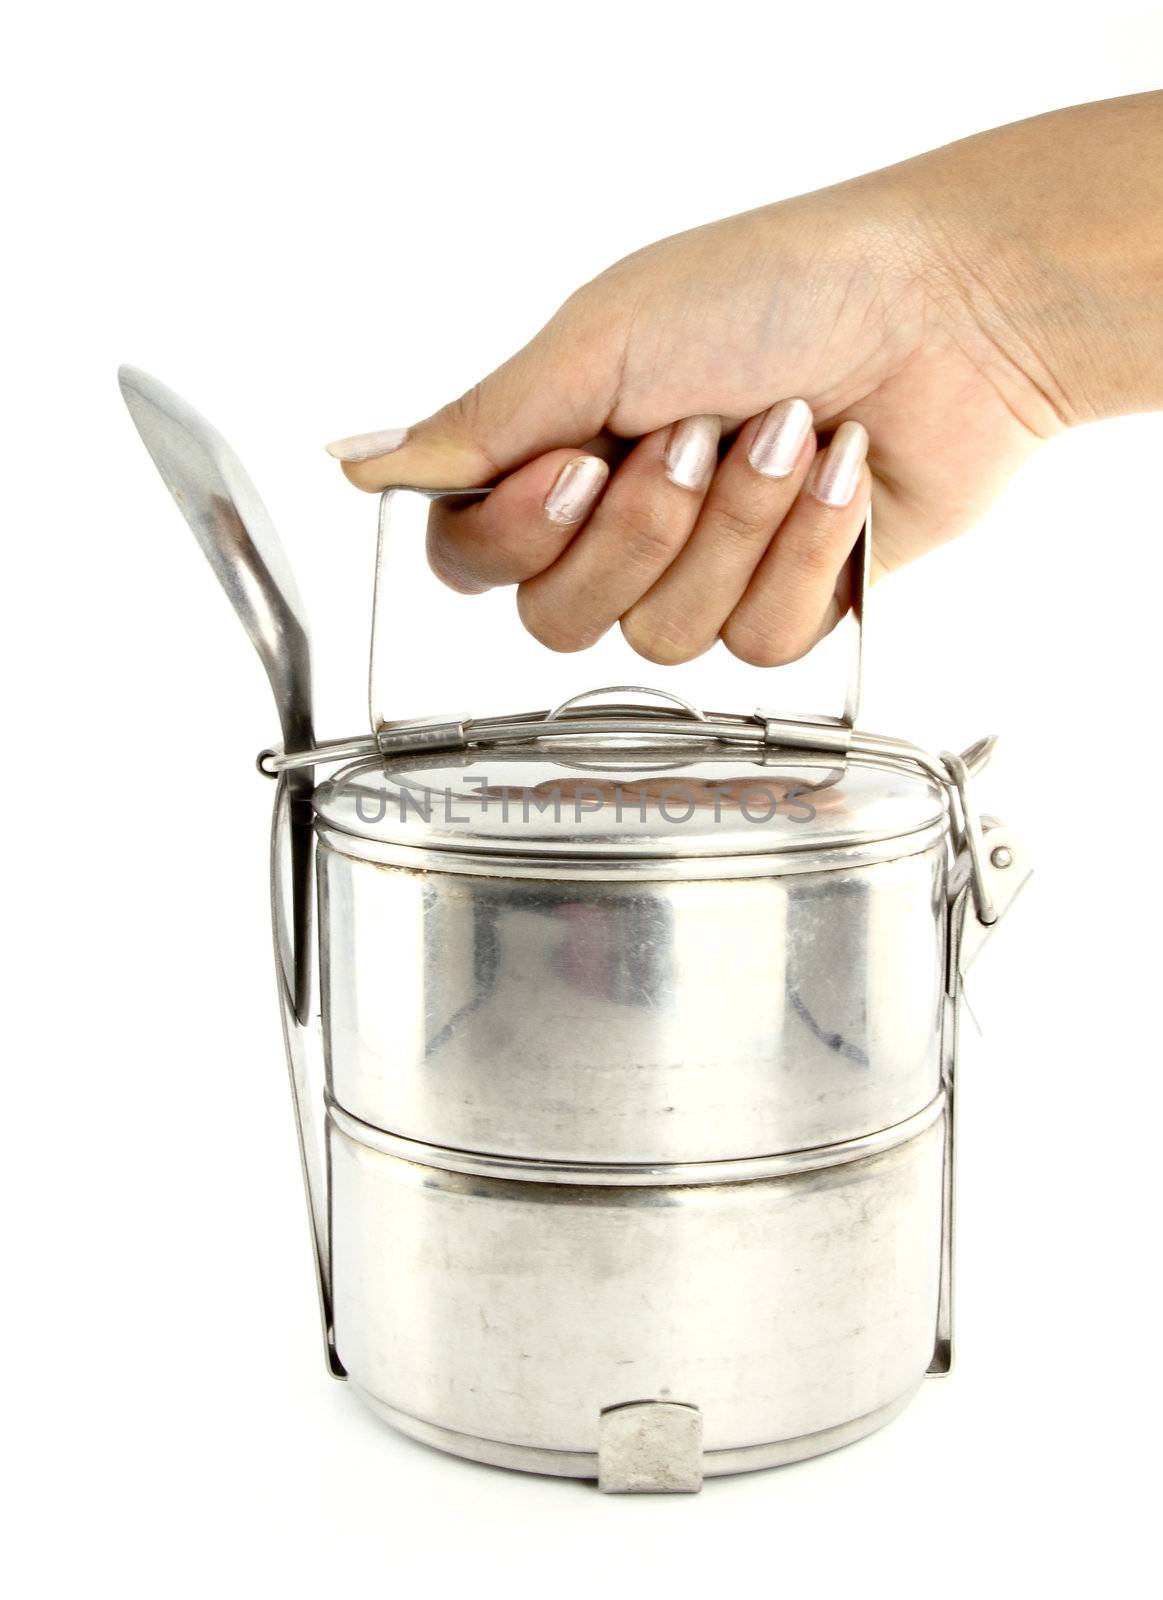 A hand holding silver metal tiffin and spoon, food container on white background